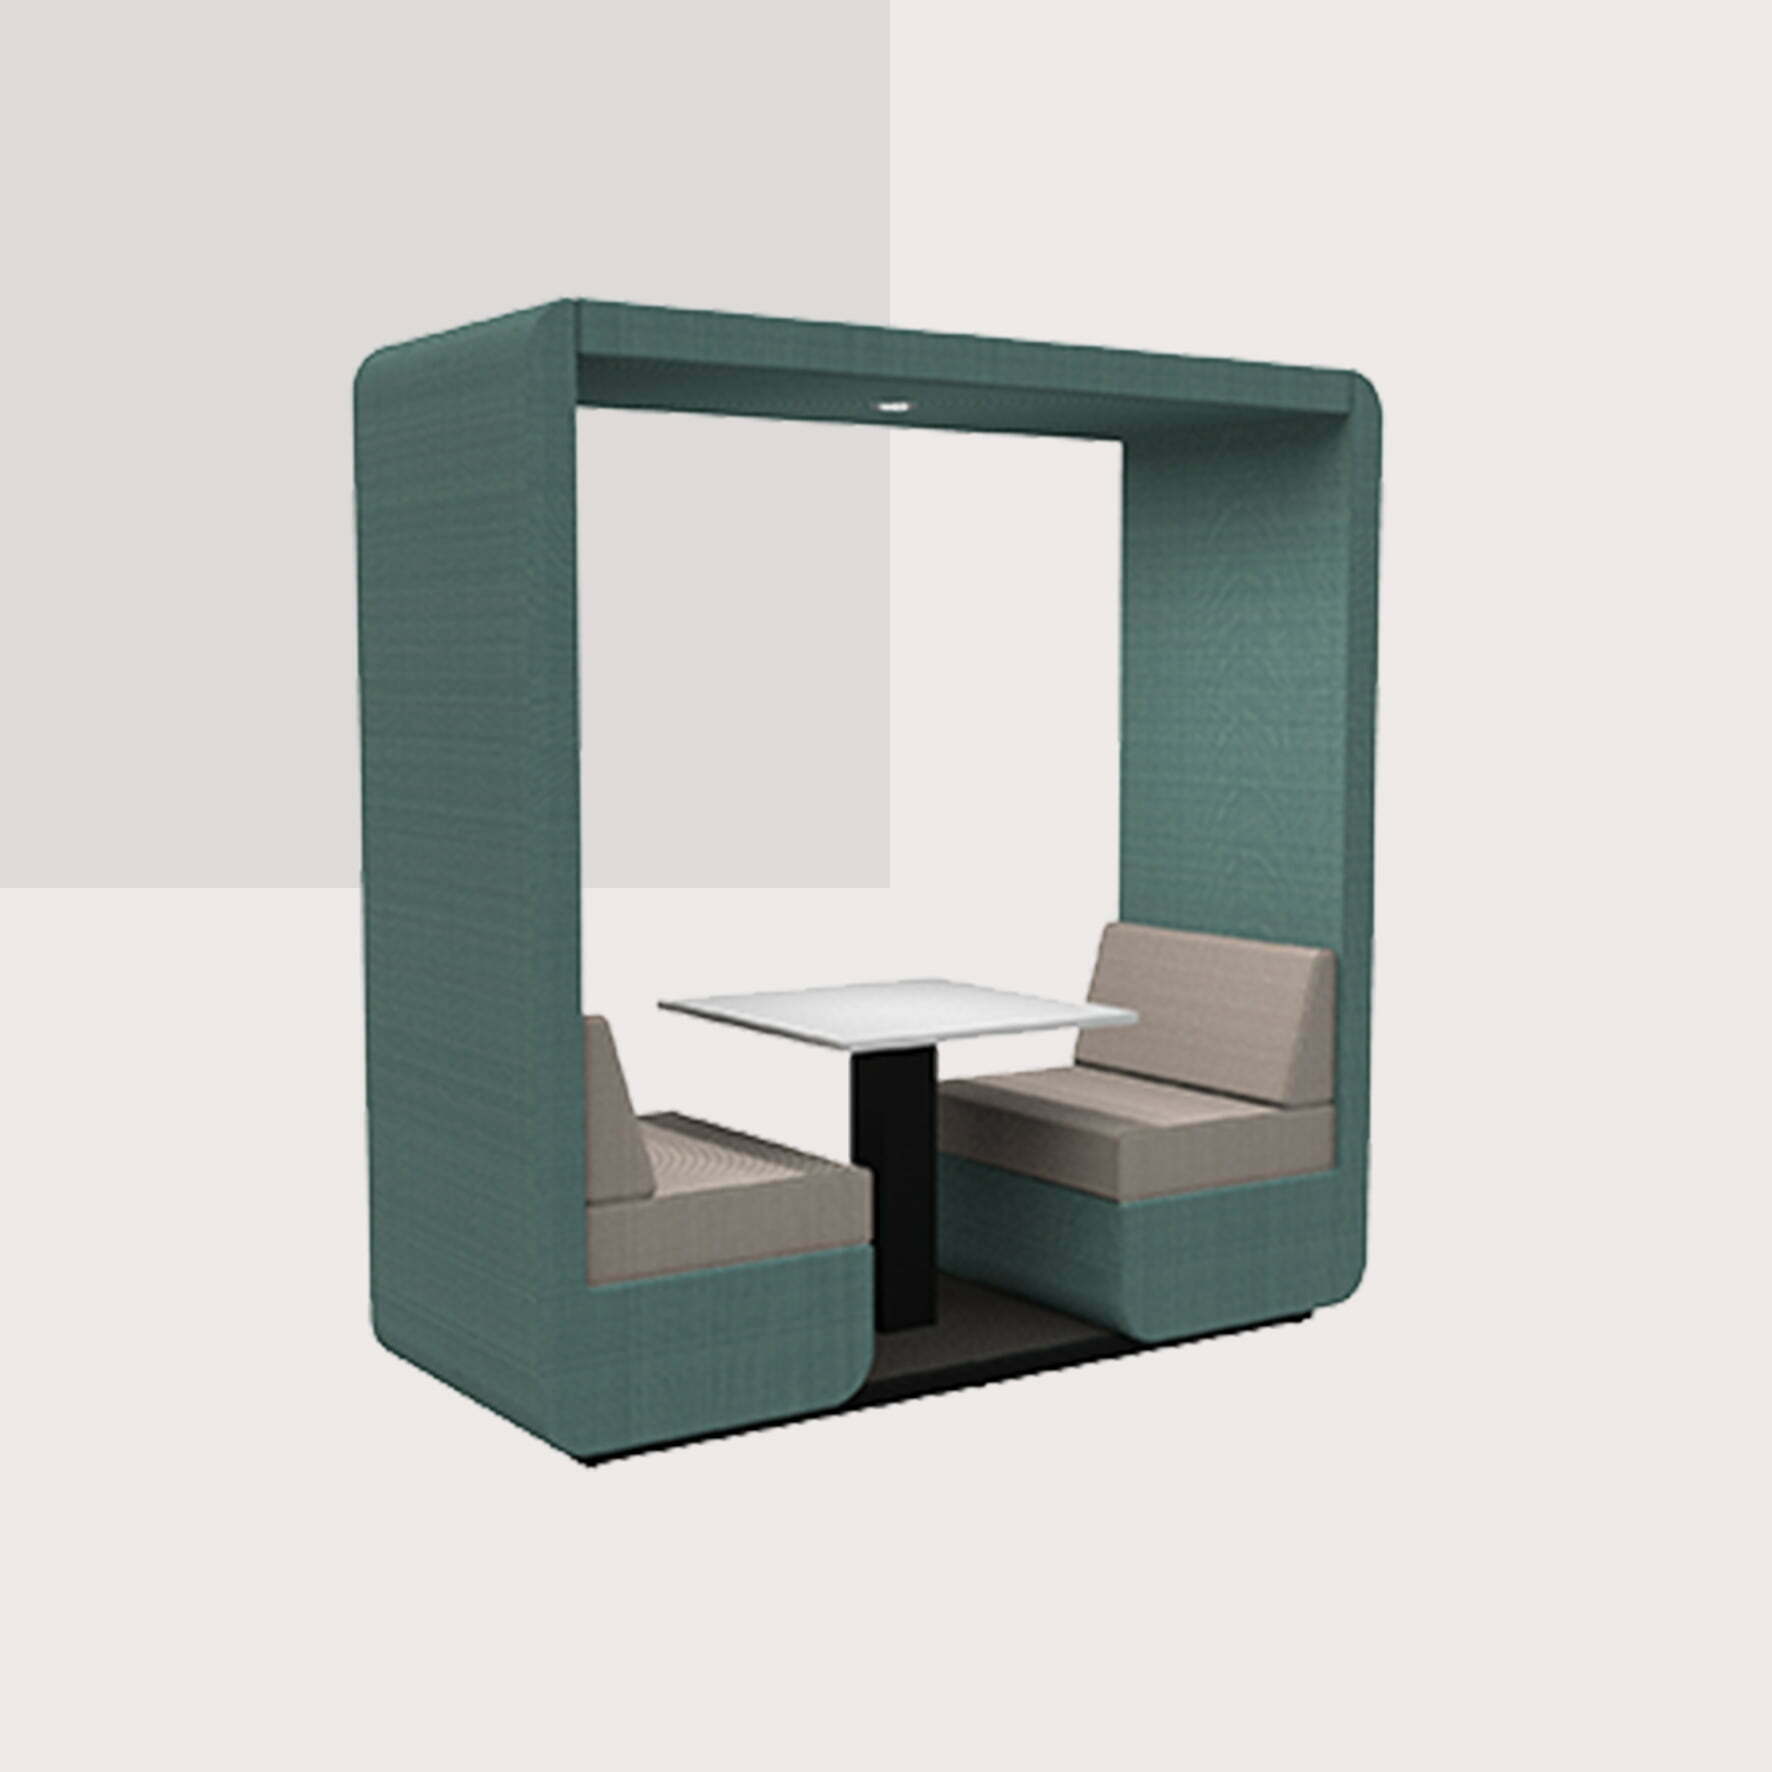 Bob 2 seat open booth with table and lighting